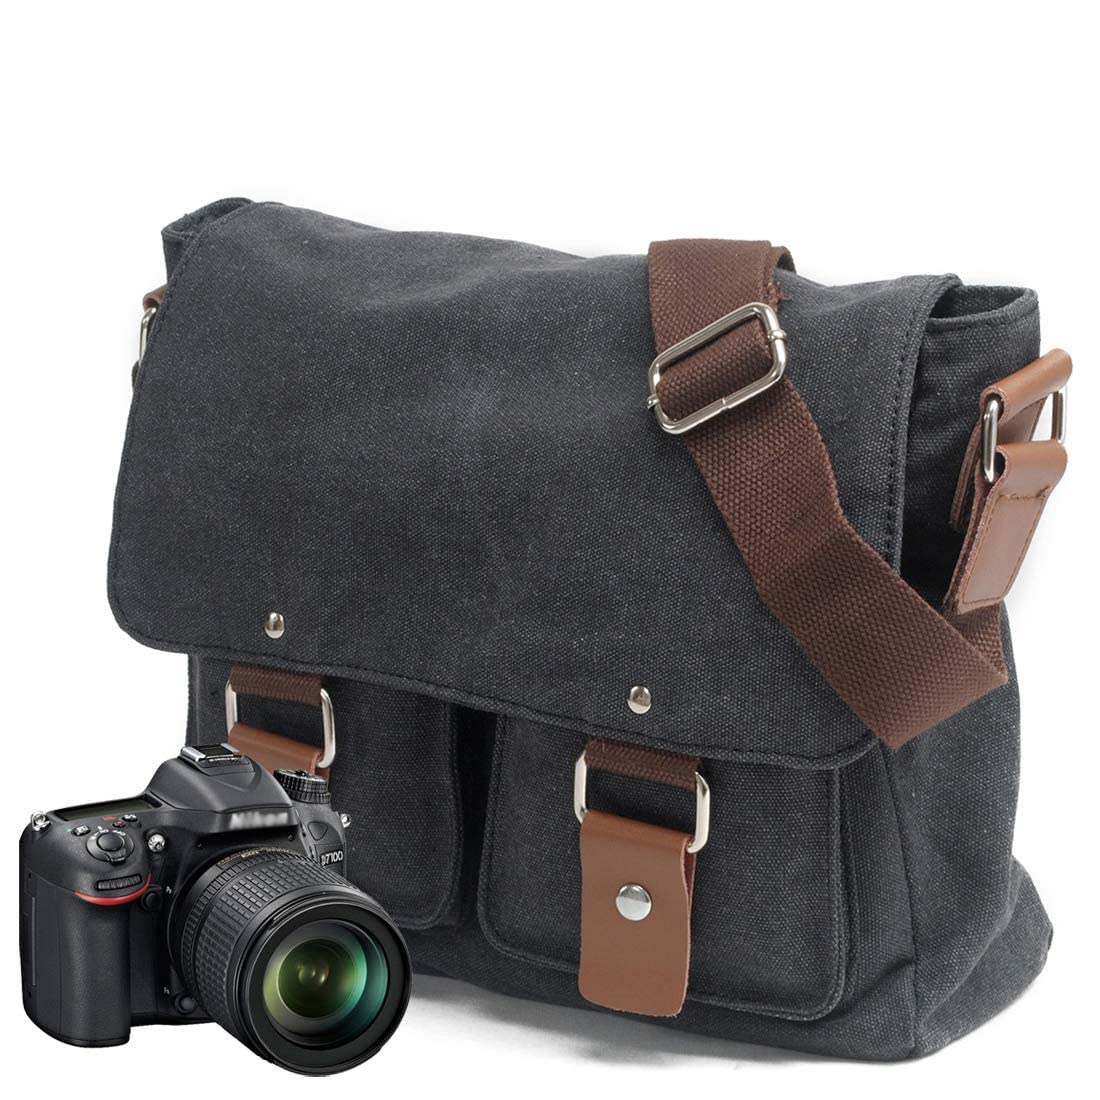 Buy Vintage Waterproof Canvas DSLR SLR Shockproof Camera Shoulder Messenger  Bag for Canon Sony Nikon Online at Low Price in India | CADEN Camera  Reviews & Ratings - Amazon.in